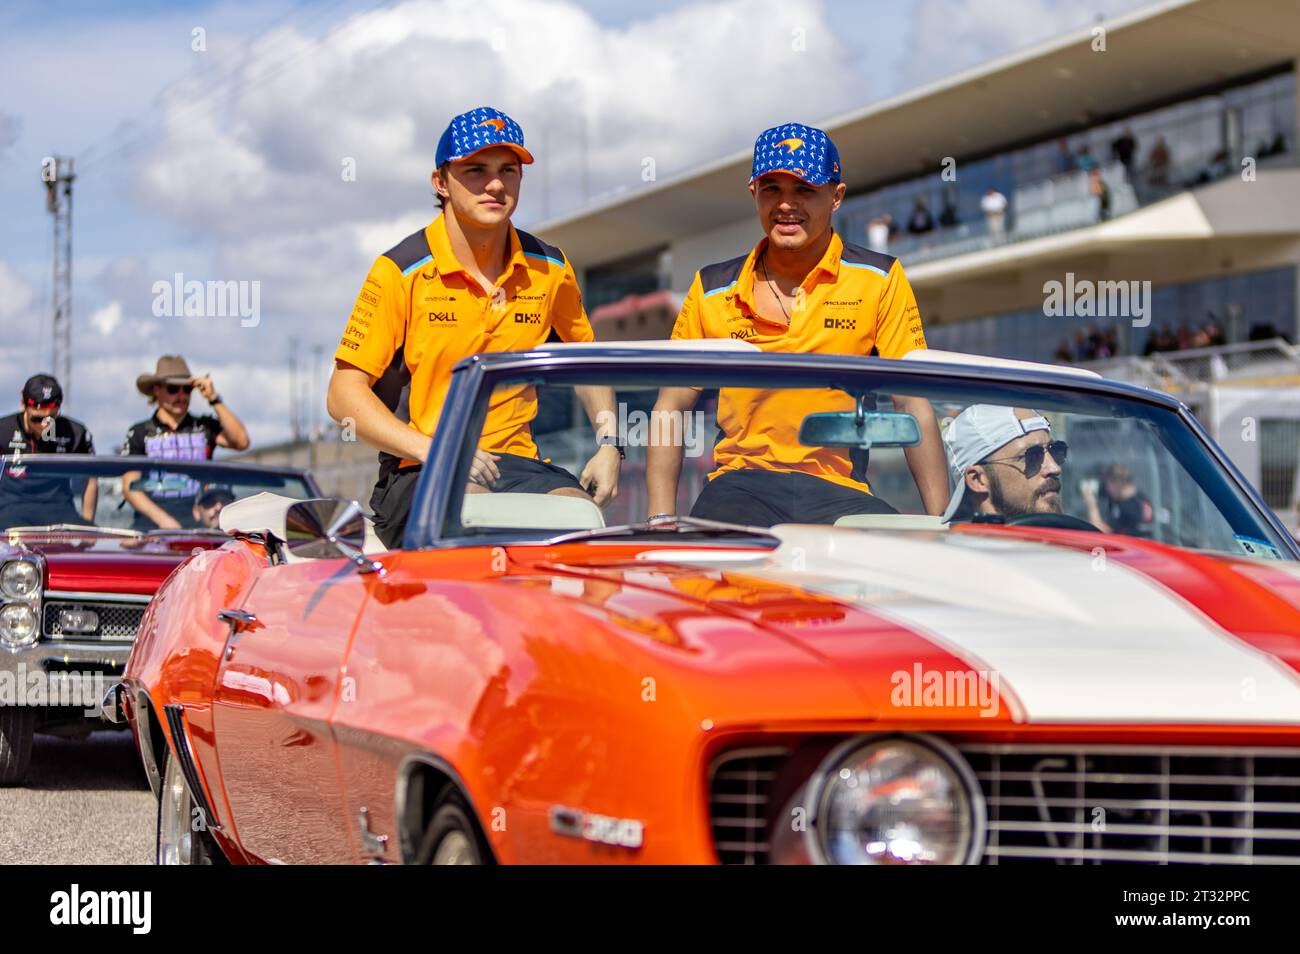 Two individuals in matching orange attire riding in a classic convertible car during a sunny real estate parade event.